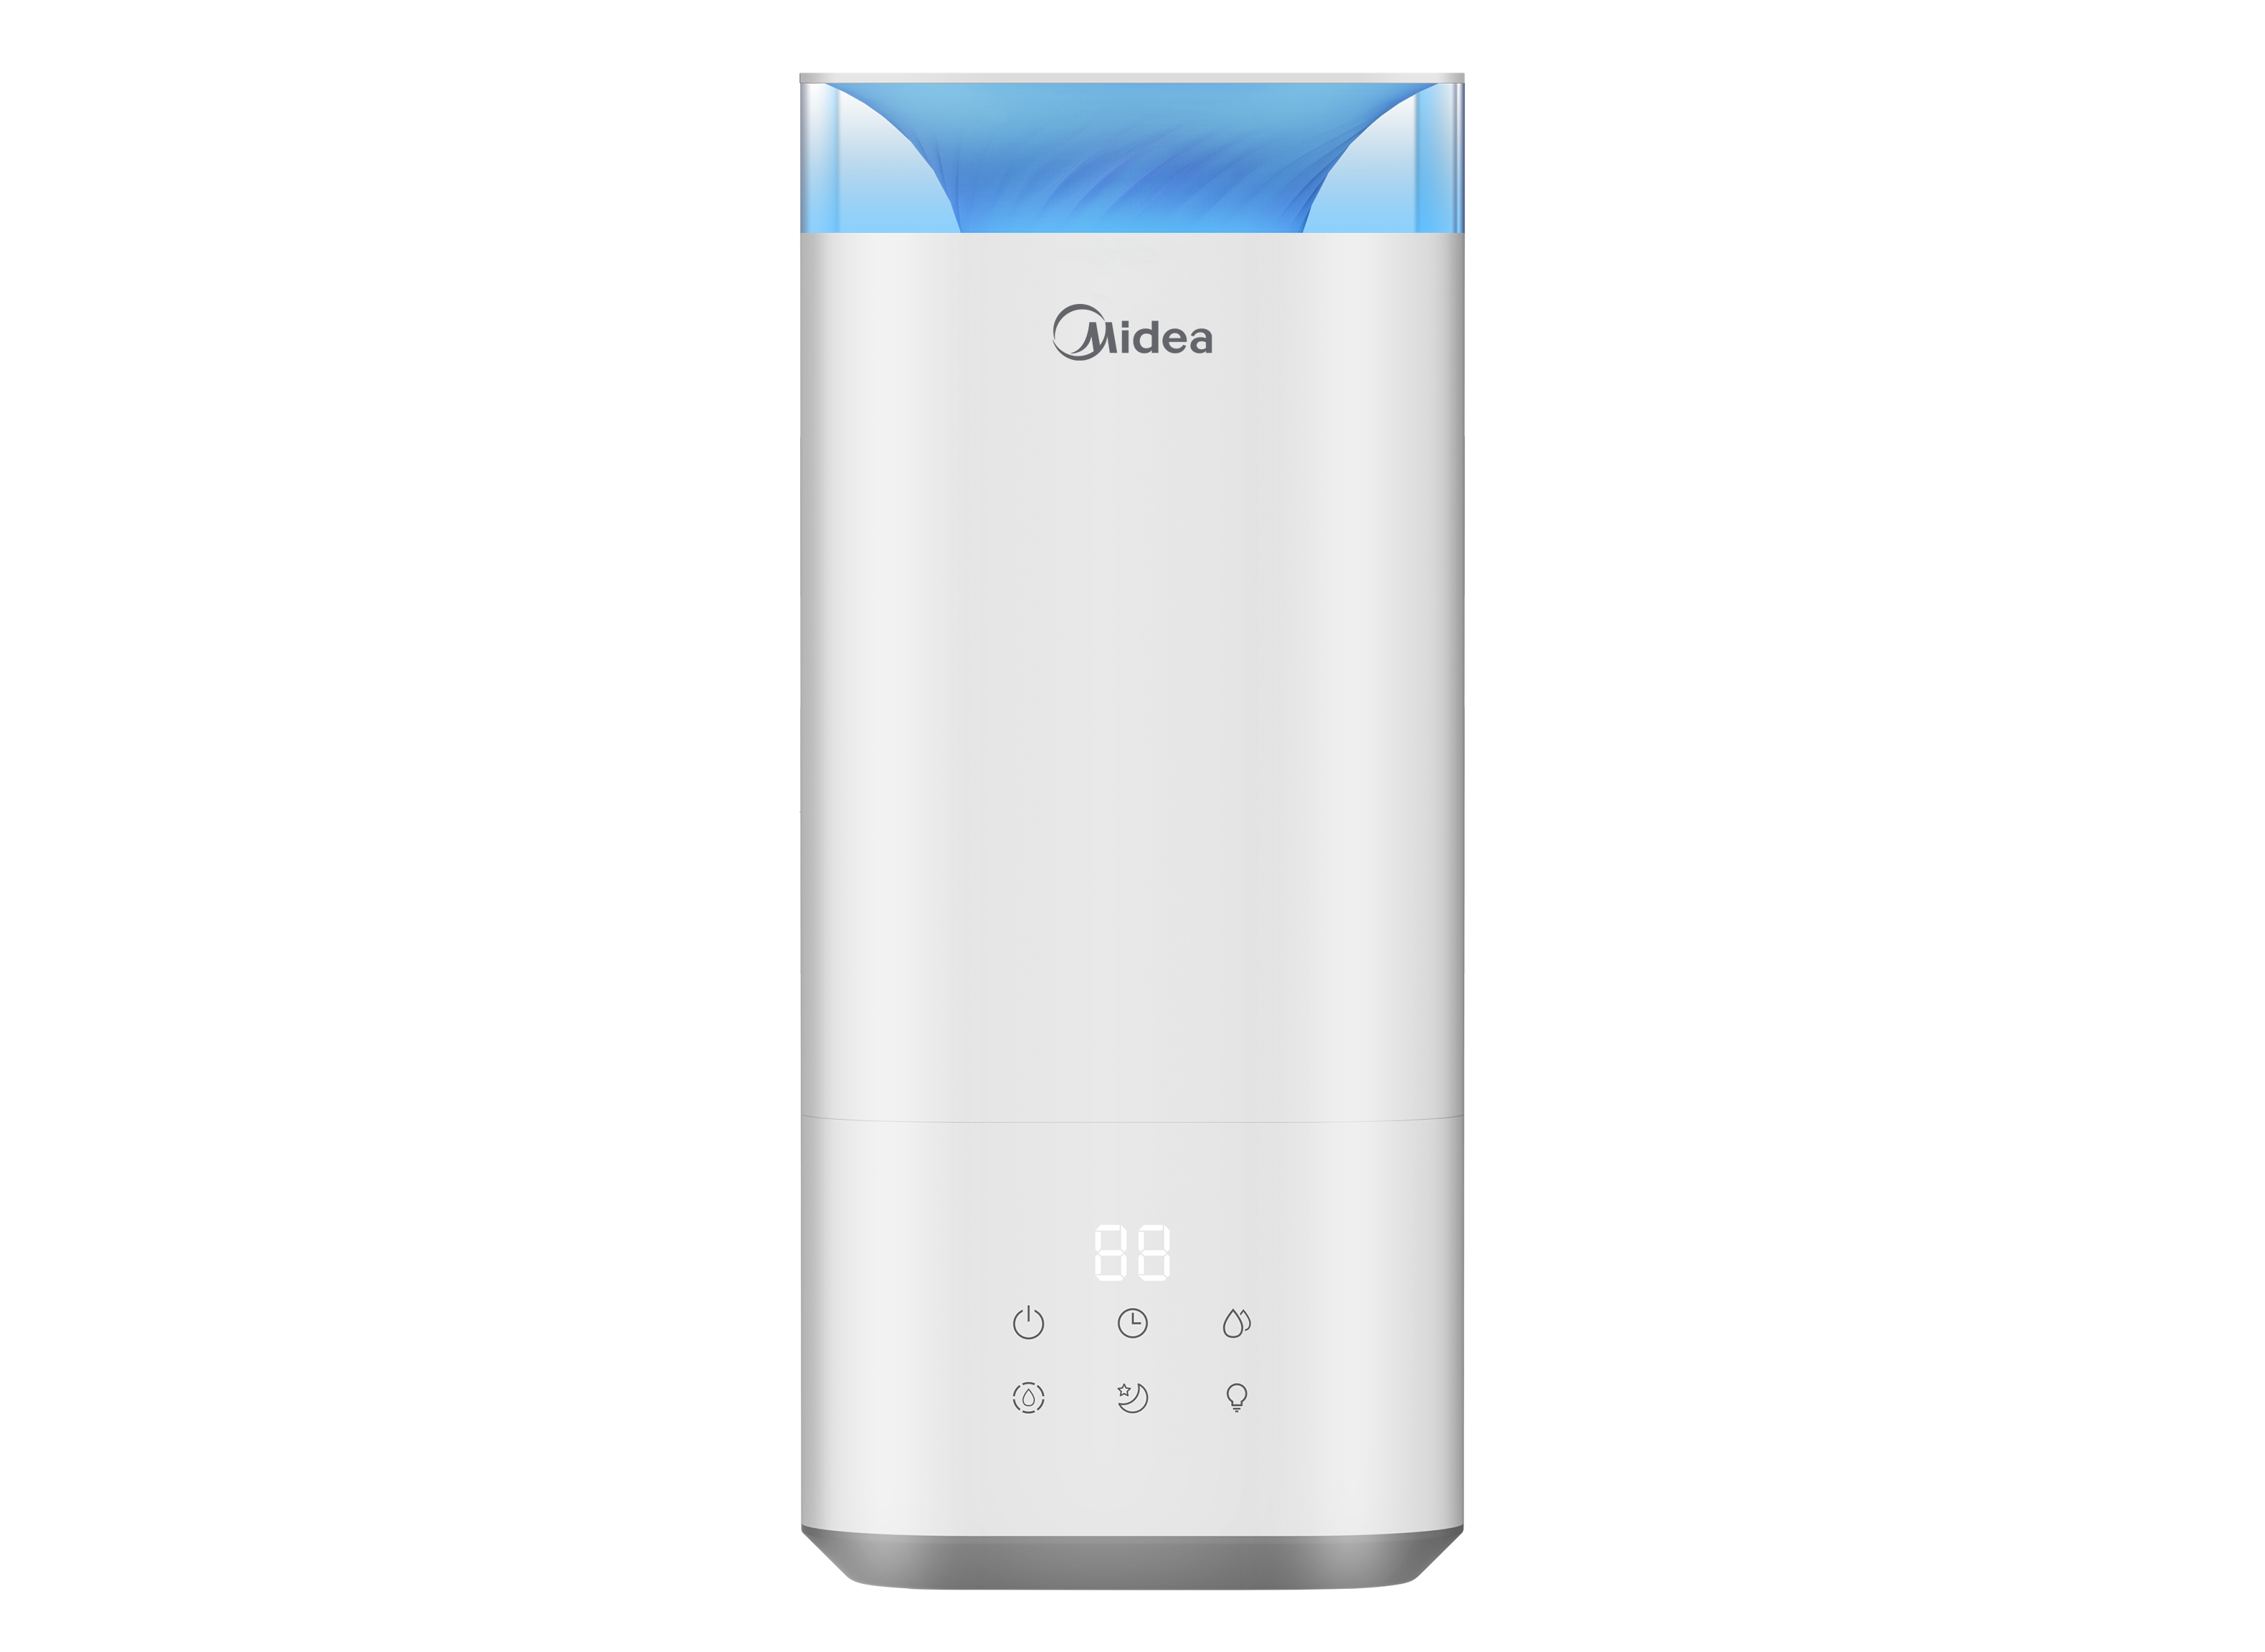 Midea SC-3C50 (Lowes) Humidifier Review - Consumer Reports